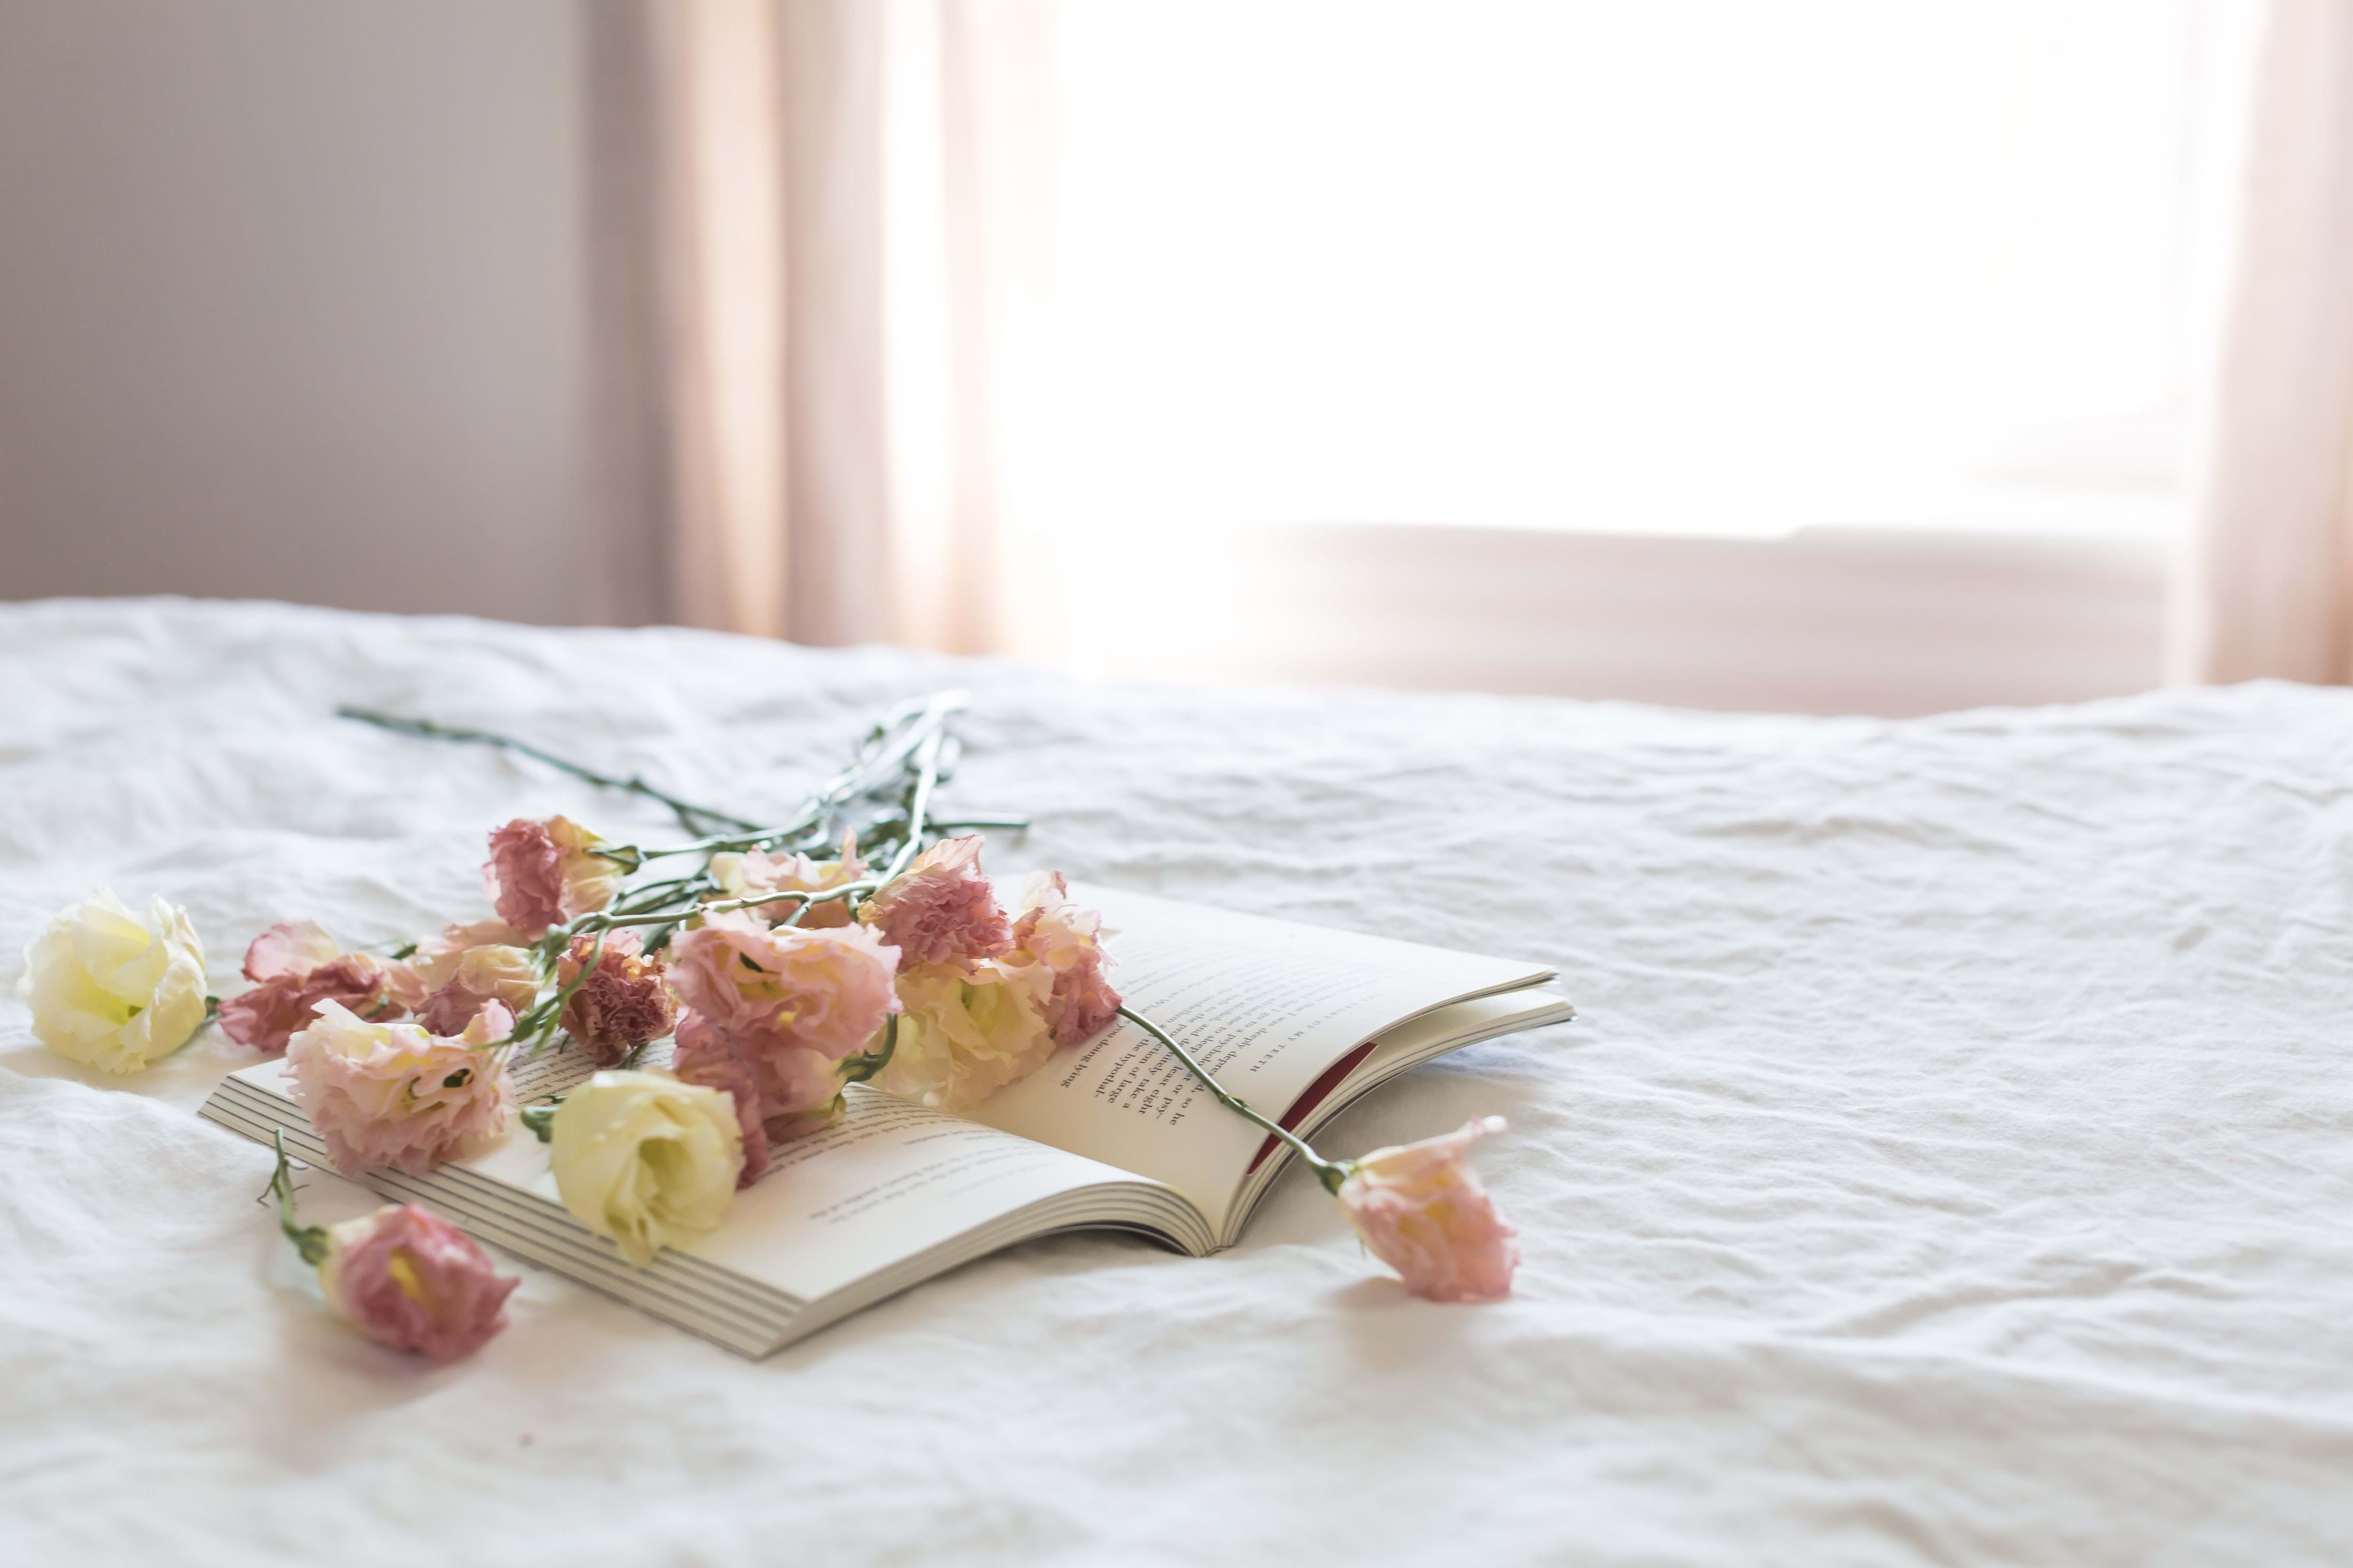 Flowers laying on a book in a bedroom